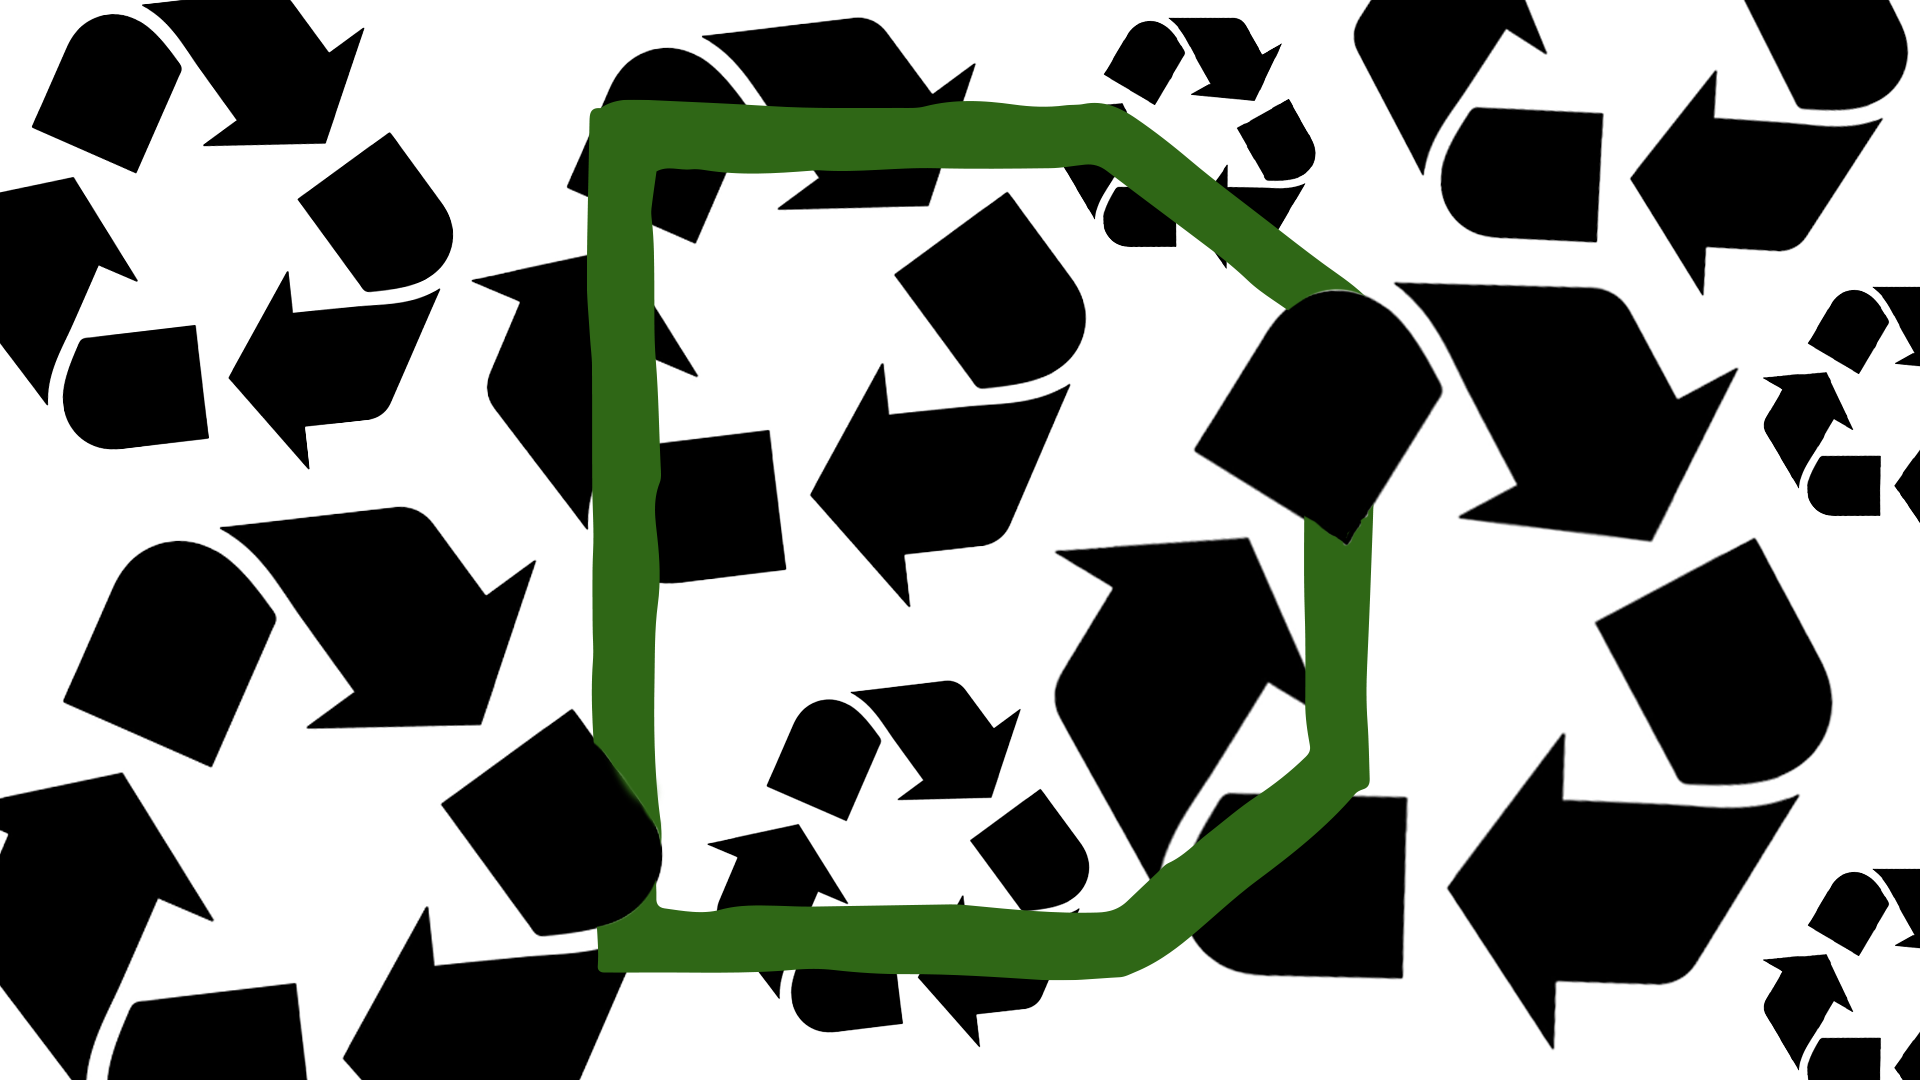 What Could a Redesigned Recycling Symbol Look Like?